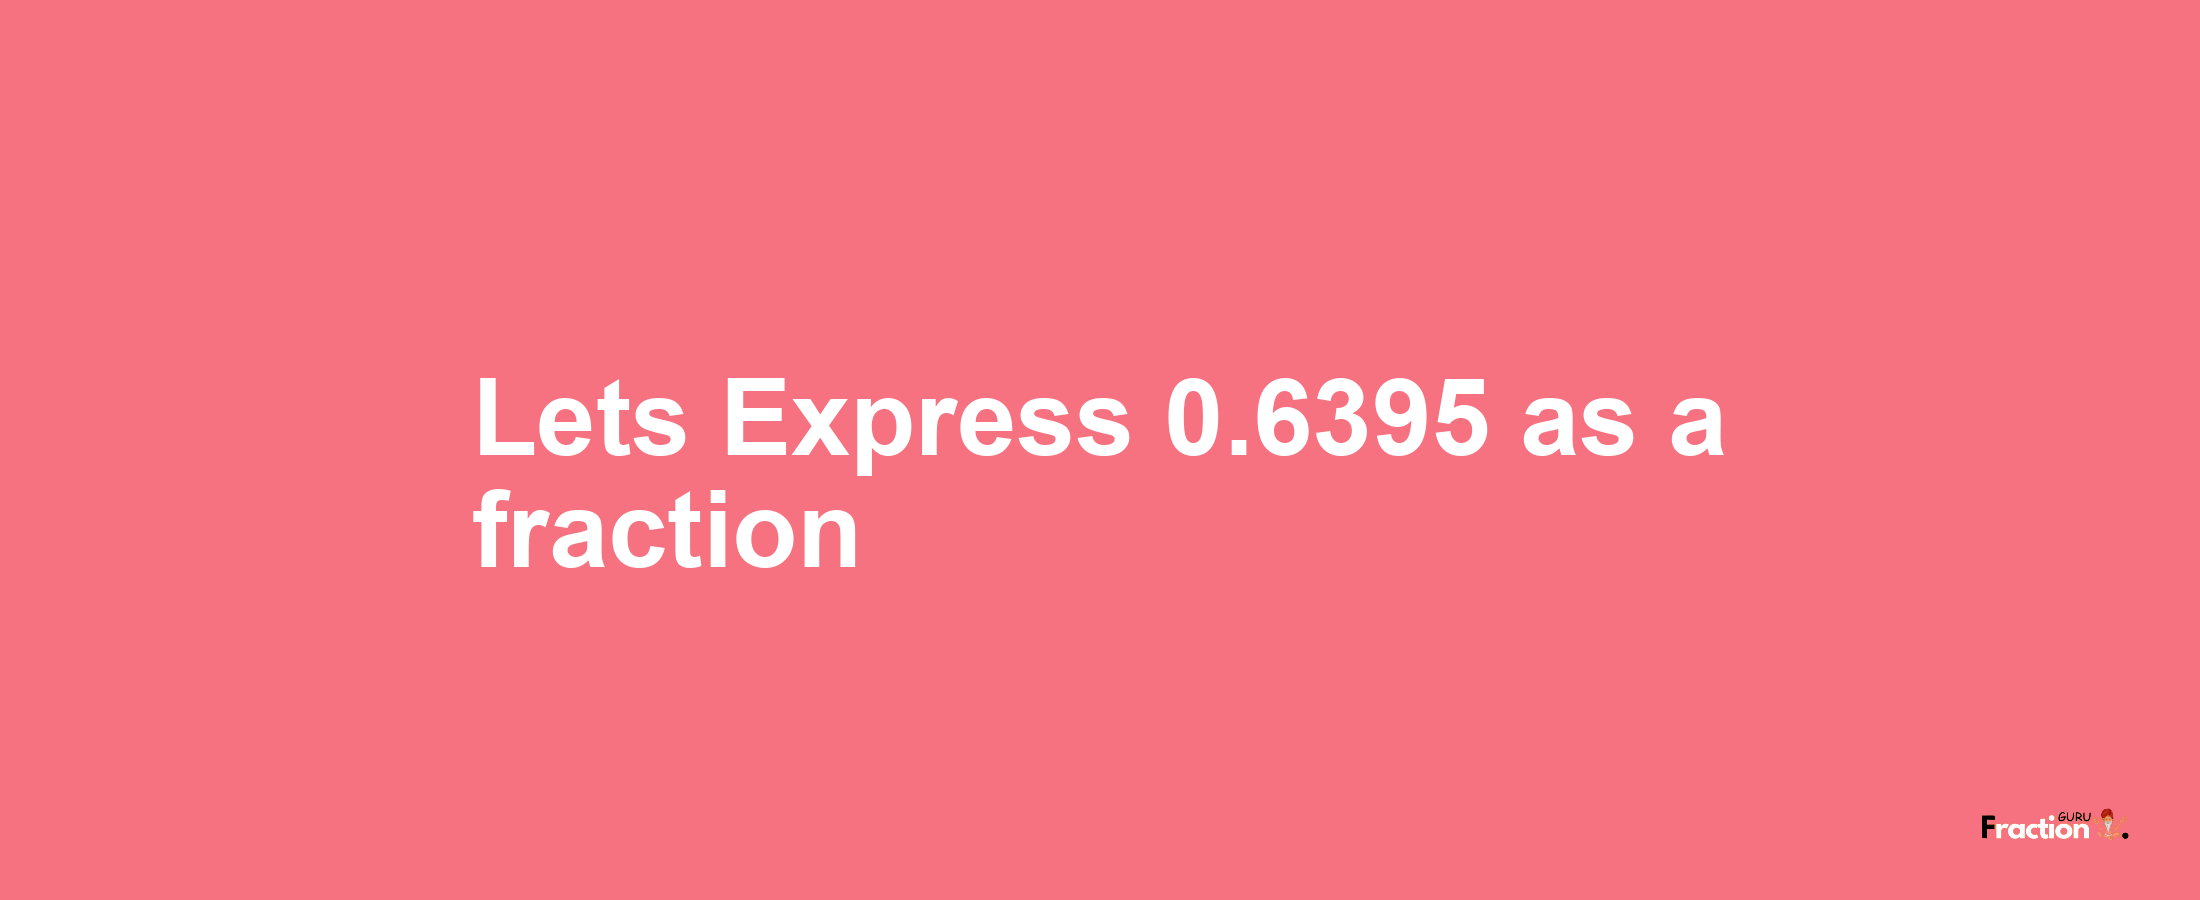 Lets Express 0.6395 as afraction